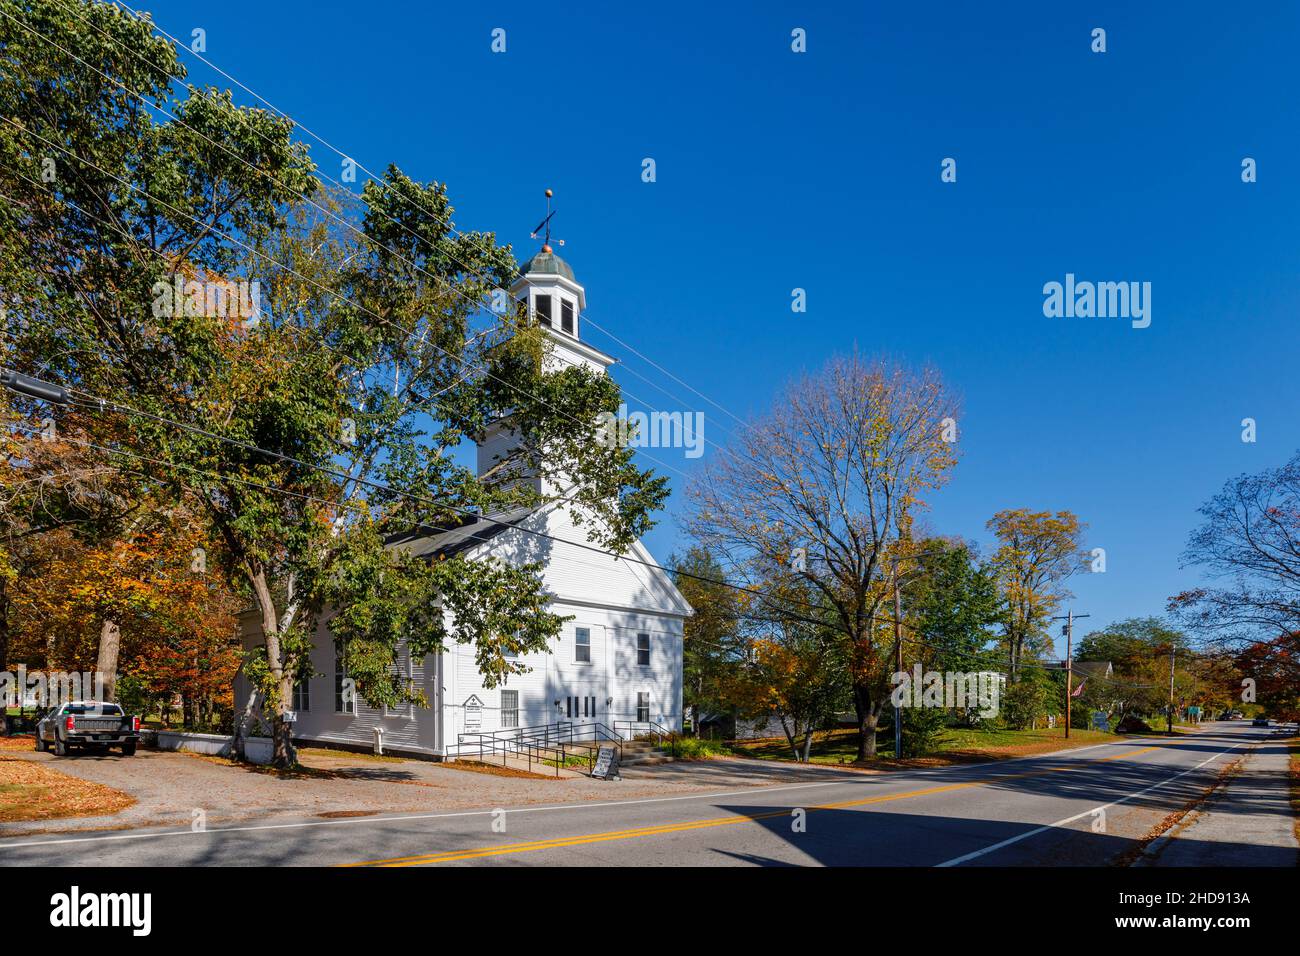 Greek Revival architecture Sandwich Methodist Church Meeting House Community Church, Center Sandwich, a village in New Hampshire, New England, USA Stock Photo